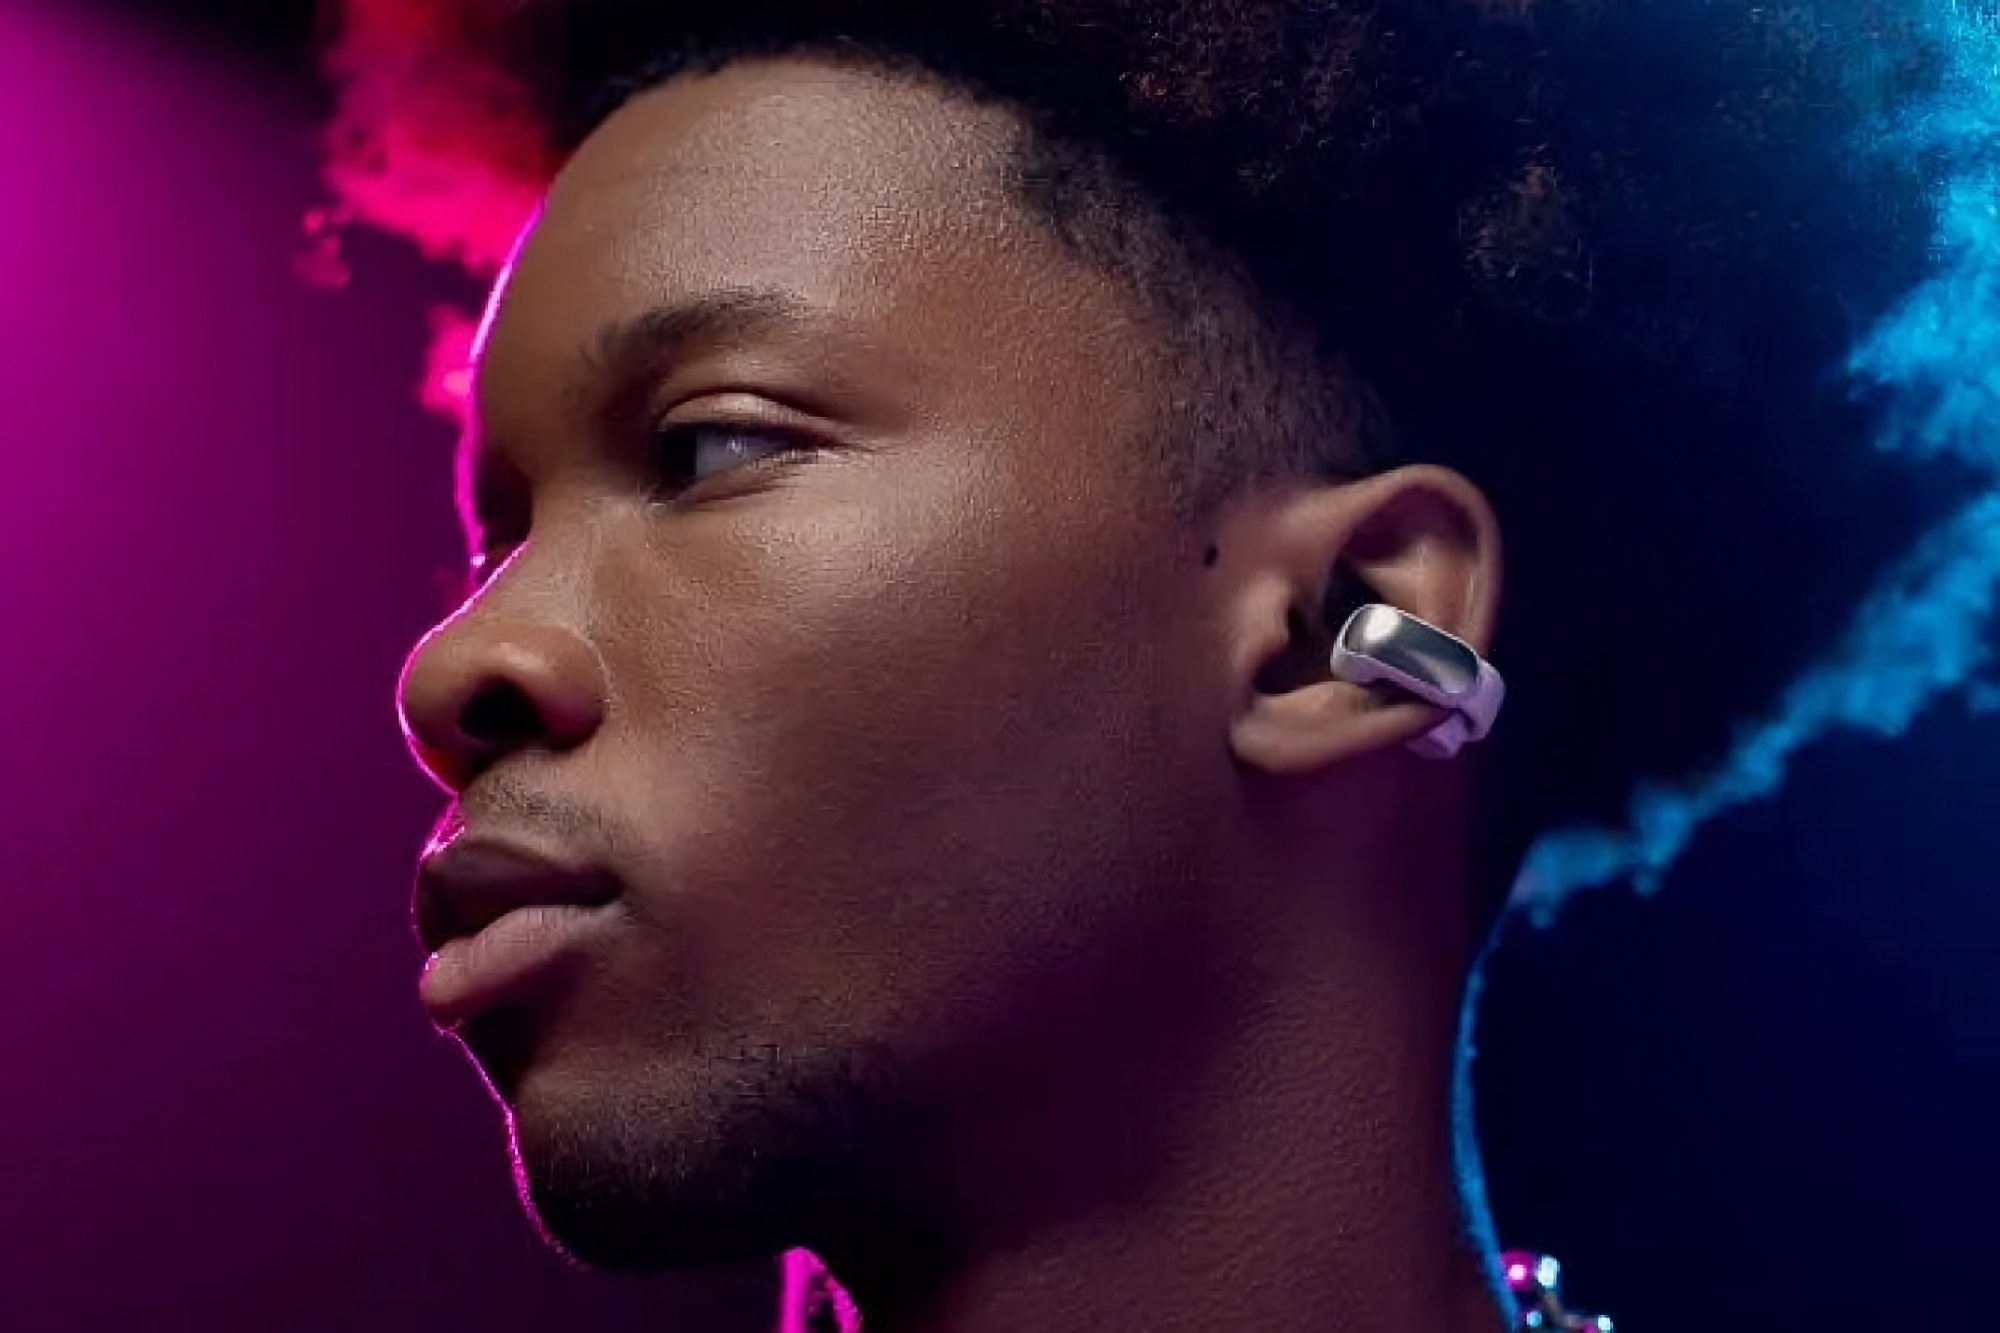 Bose Ultra Open Earbuds with an unusual design started selling in the US for $300